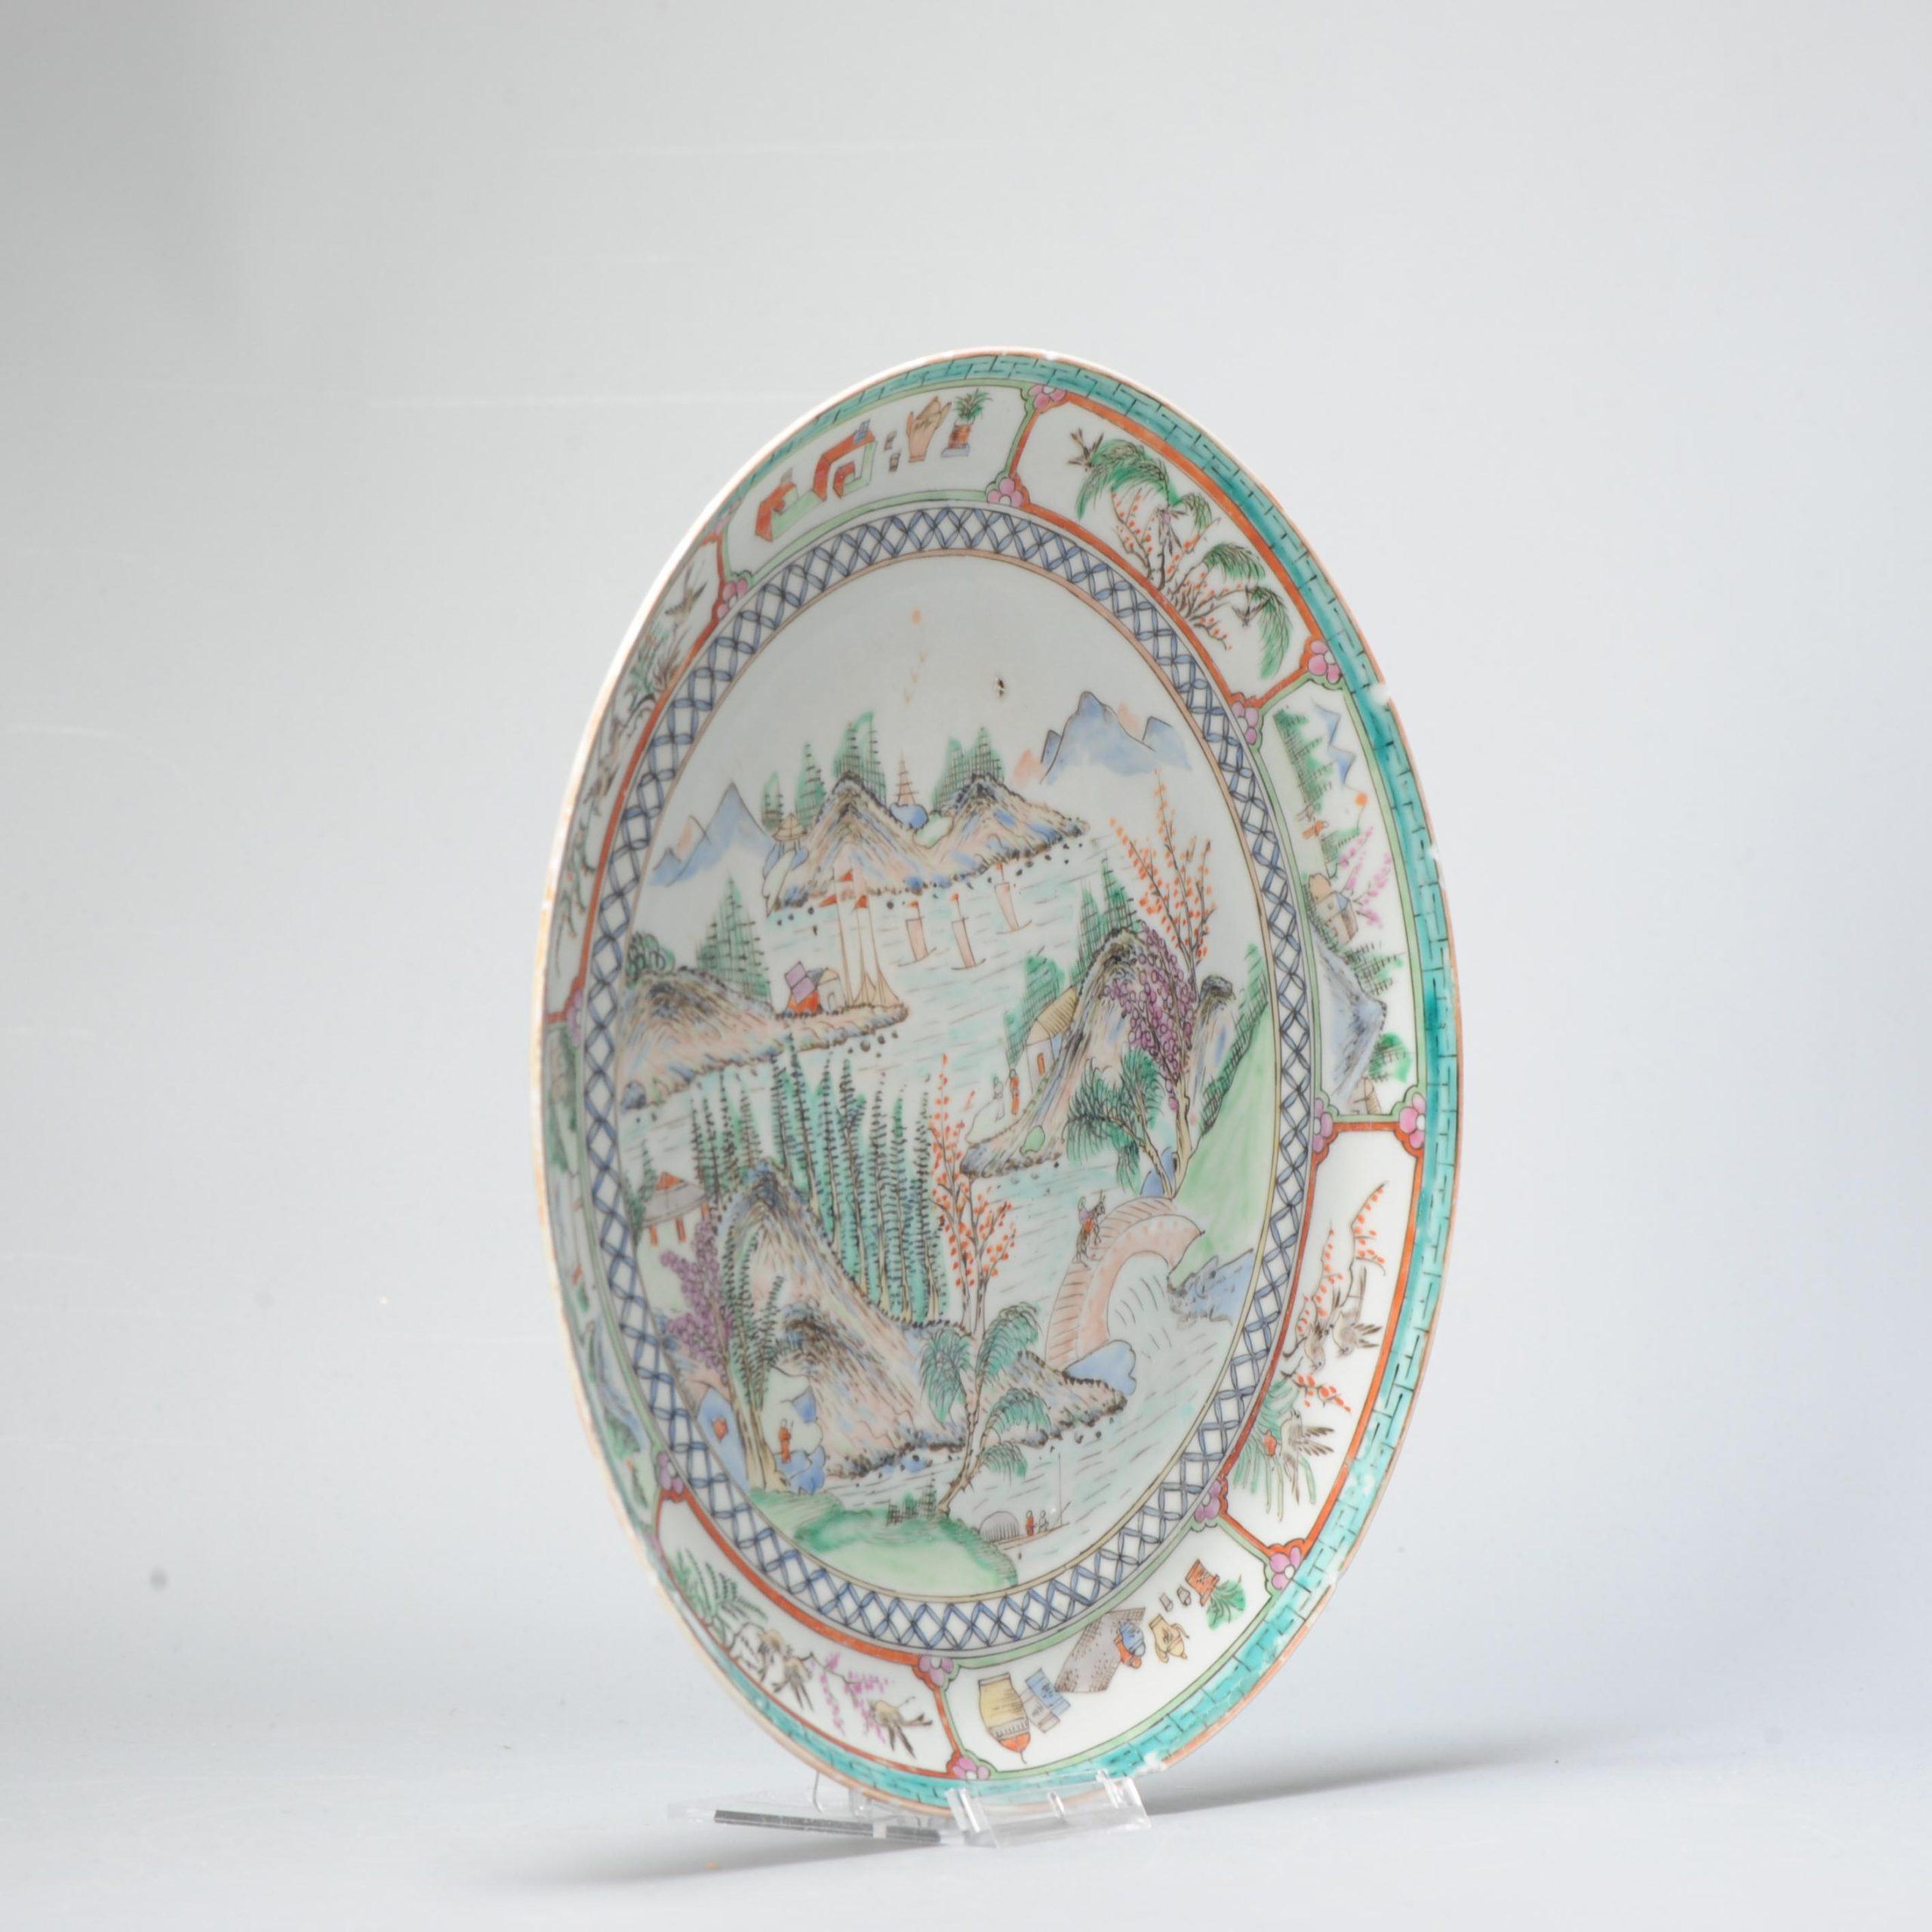 Very nice and unusual cantonese dish in polychrome colors. Stunningly painted with a central scene of a highly detailed landscape.

Truly a fantastic piece.

Additional information:
Material: Porcelain & Pottery
Region of Origin: China
Period: 19th